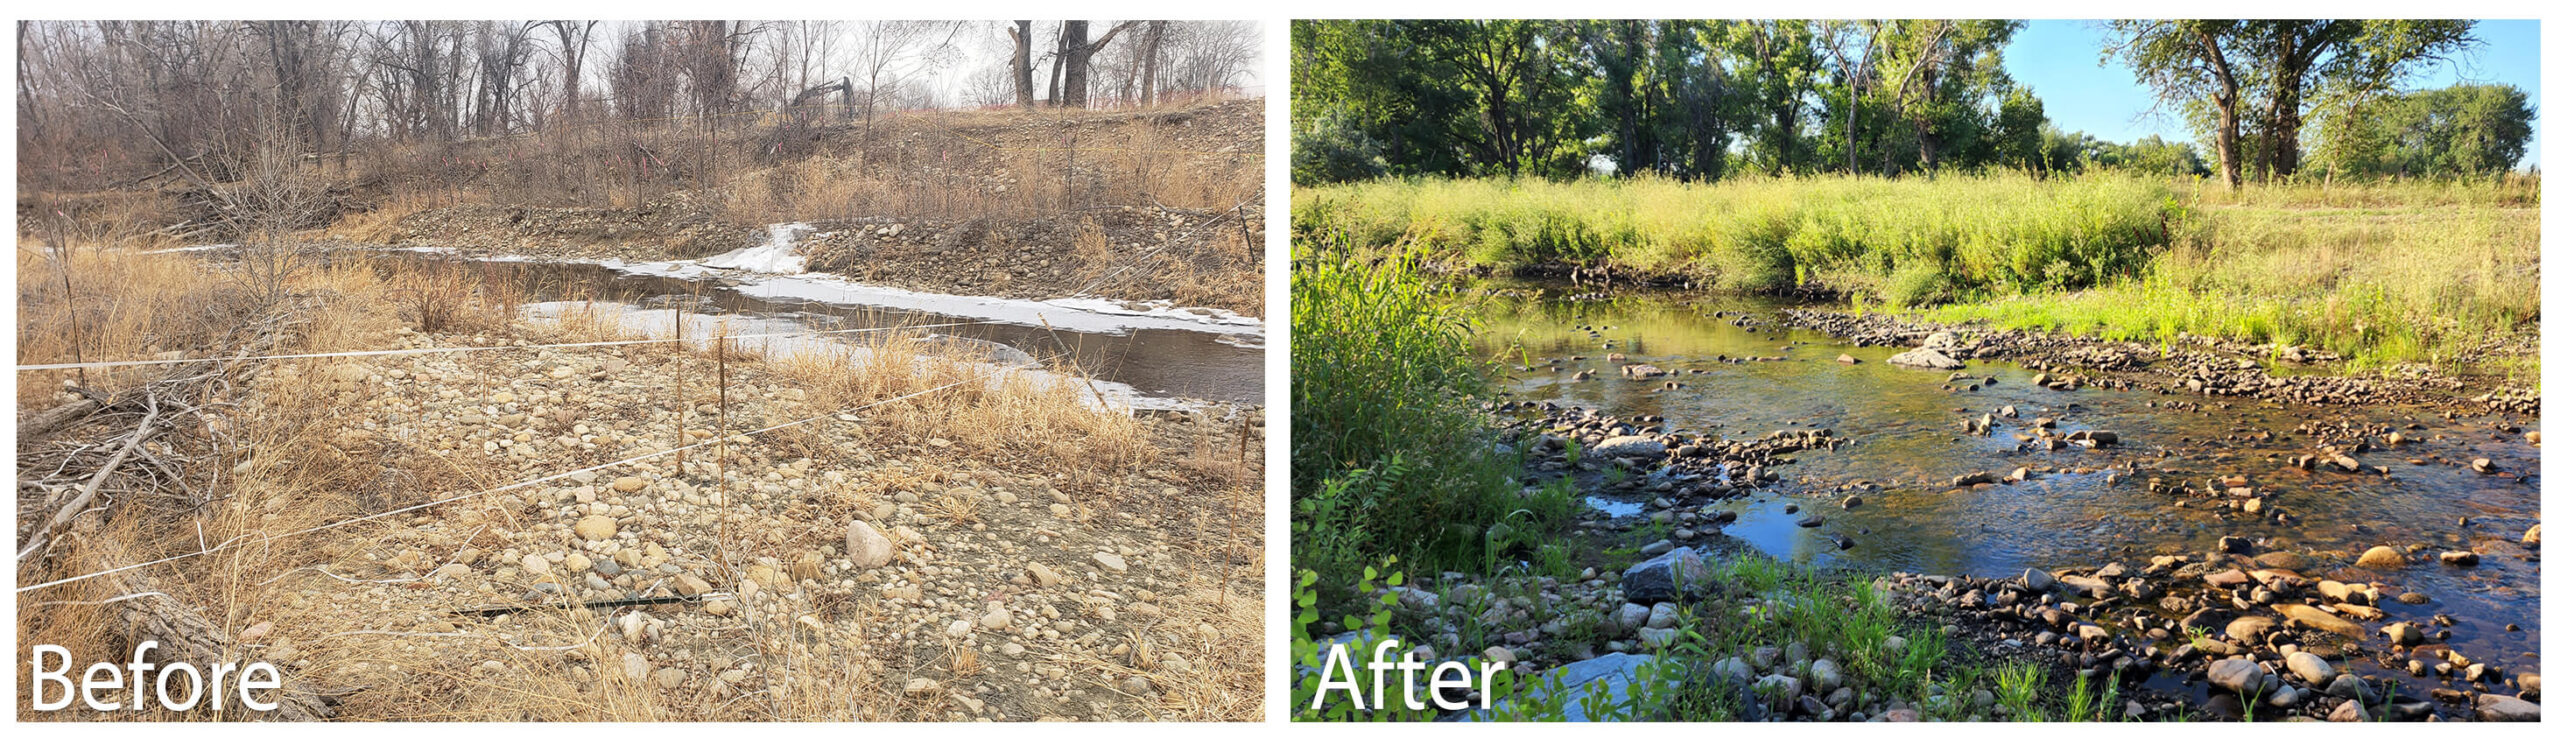 Side-by-side photos showing restoration of the Niwot Ditch project before and after repairs.